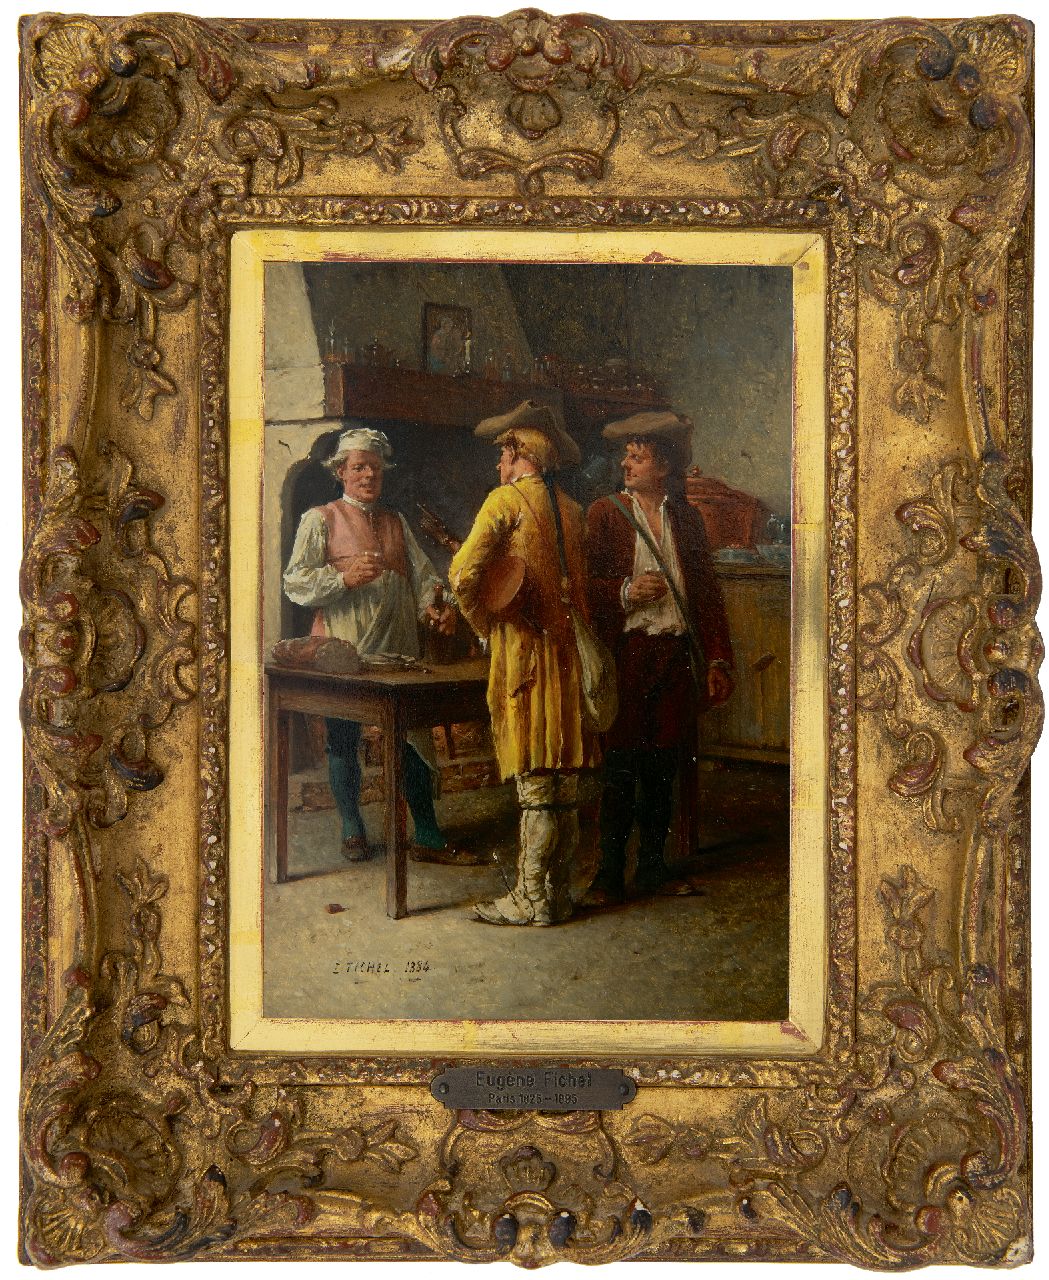 Fichel B.E.  | Benjamin 'Eugène' Fichel | Paintings offered for sale | A break at the inn, oil on panel 22.0 x 15.7 cm, signed l.l. and dated 1884